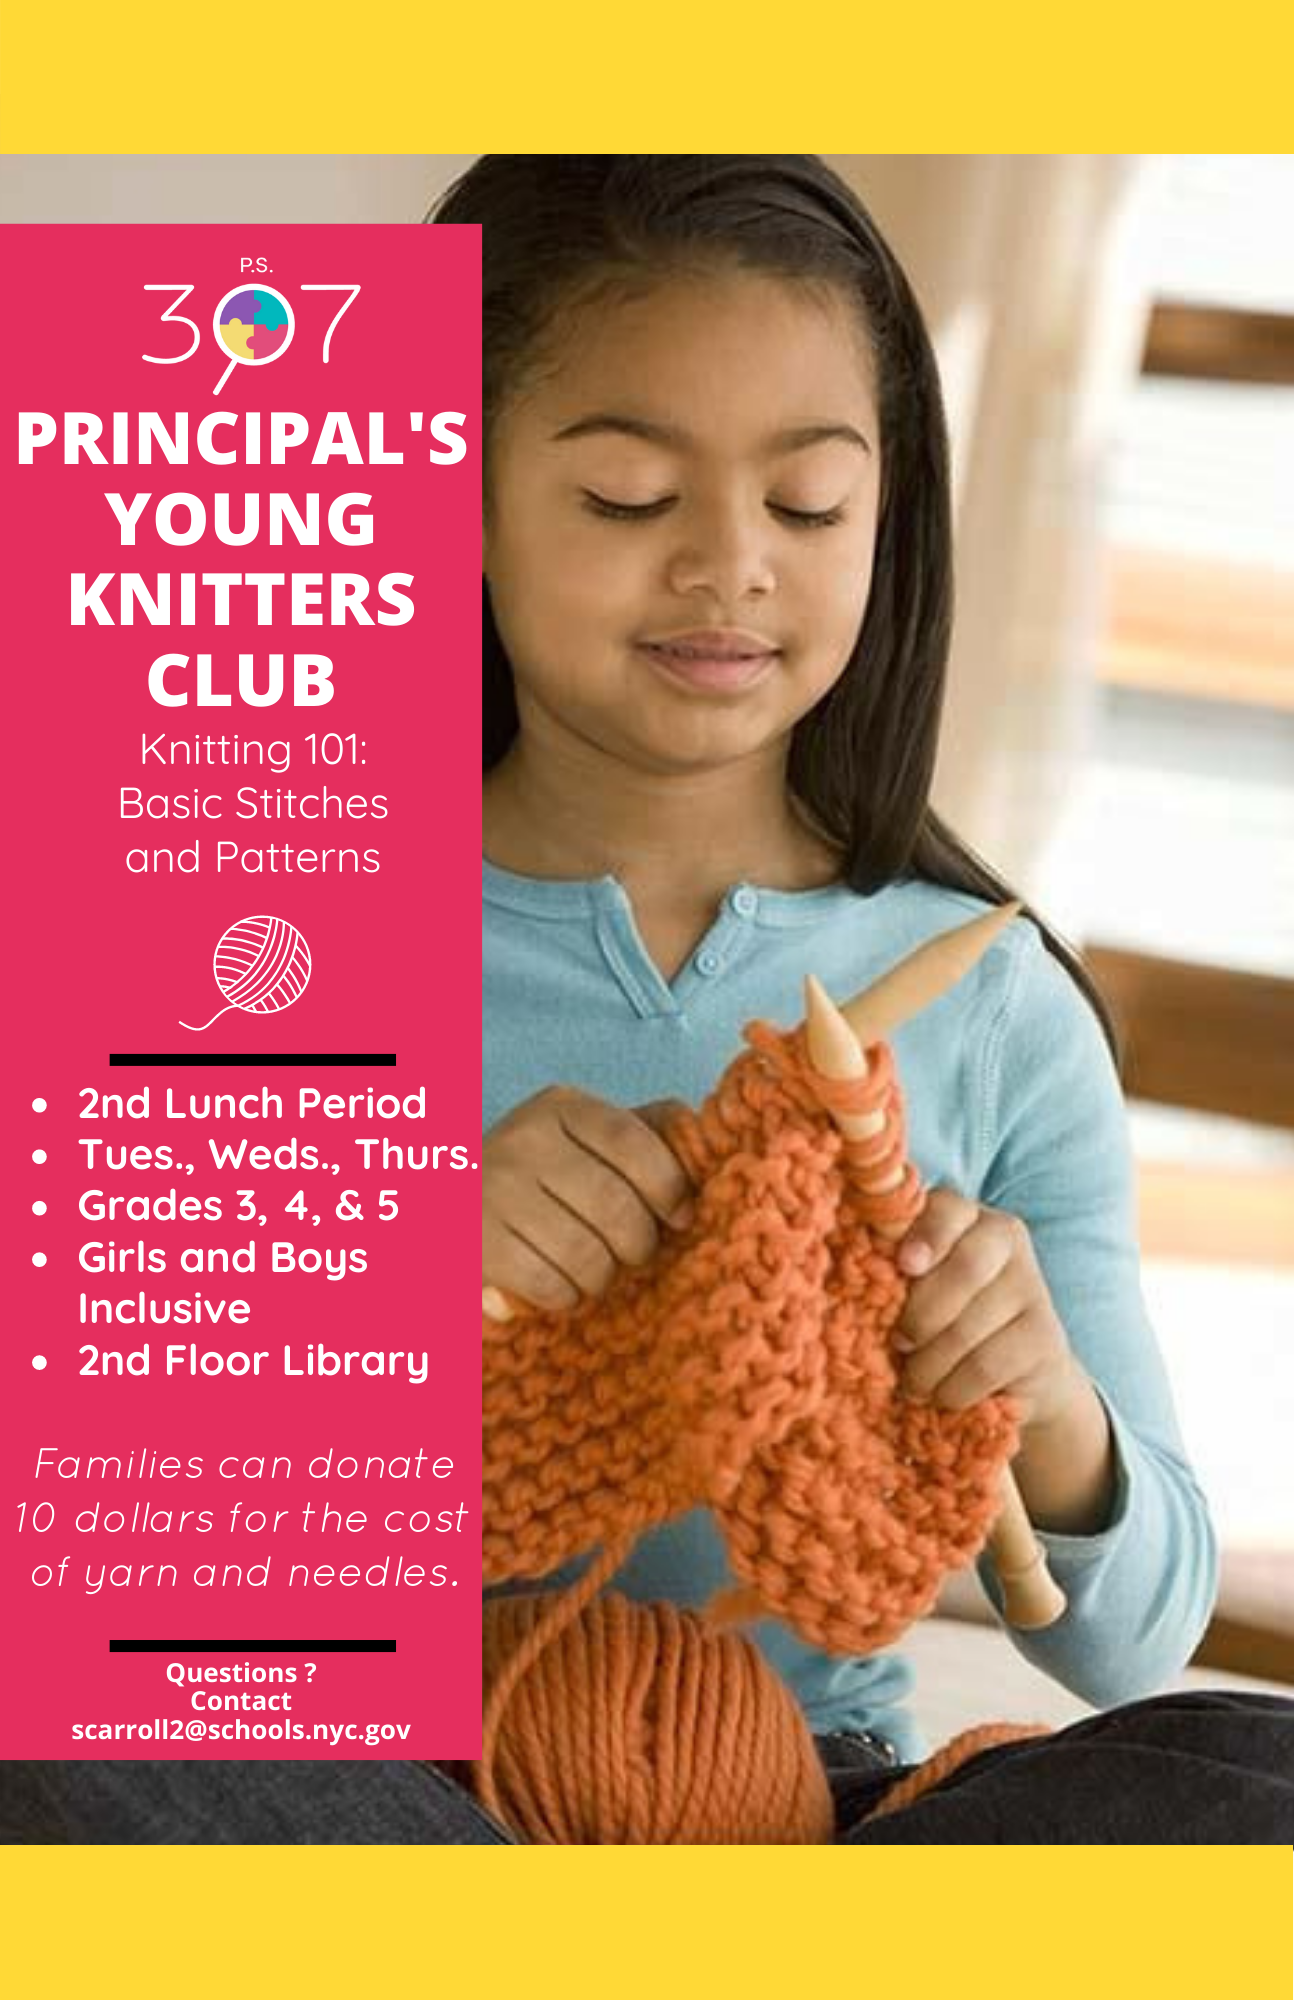 PS307 Principal's Young Knitters Club